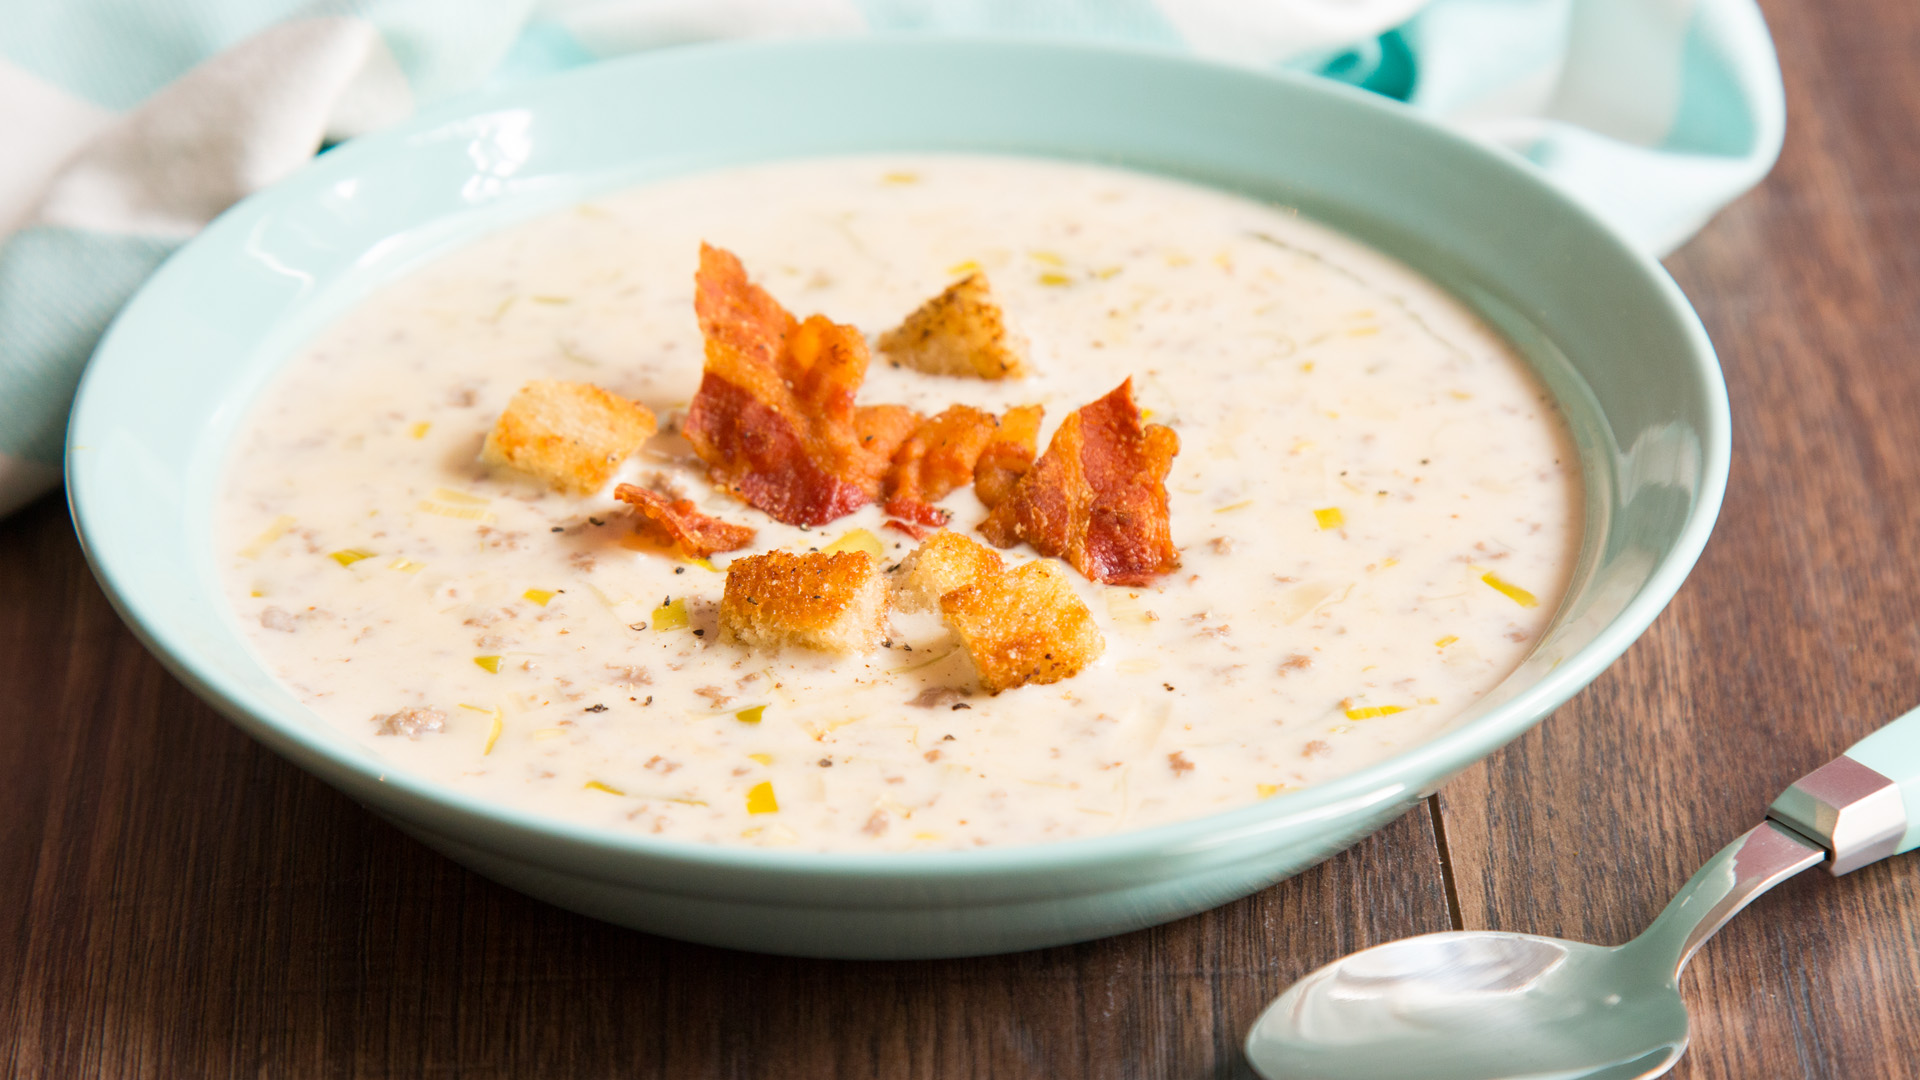 Käse-Lauch-Hack-Suppe mit Bacon-Topping